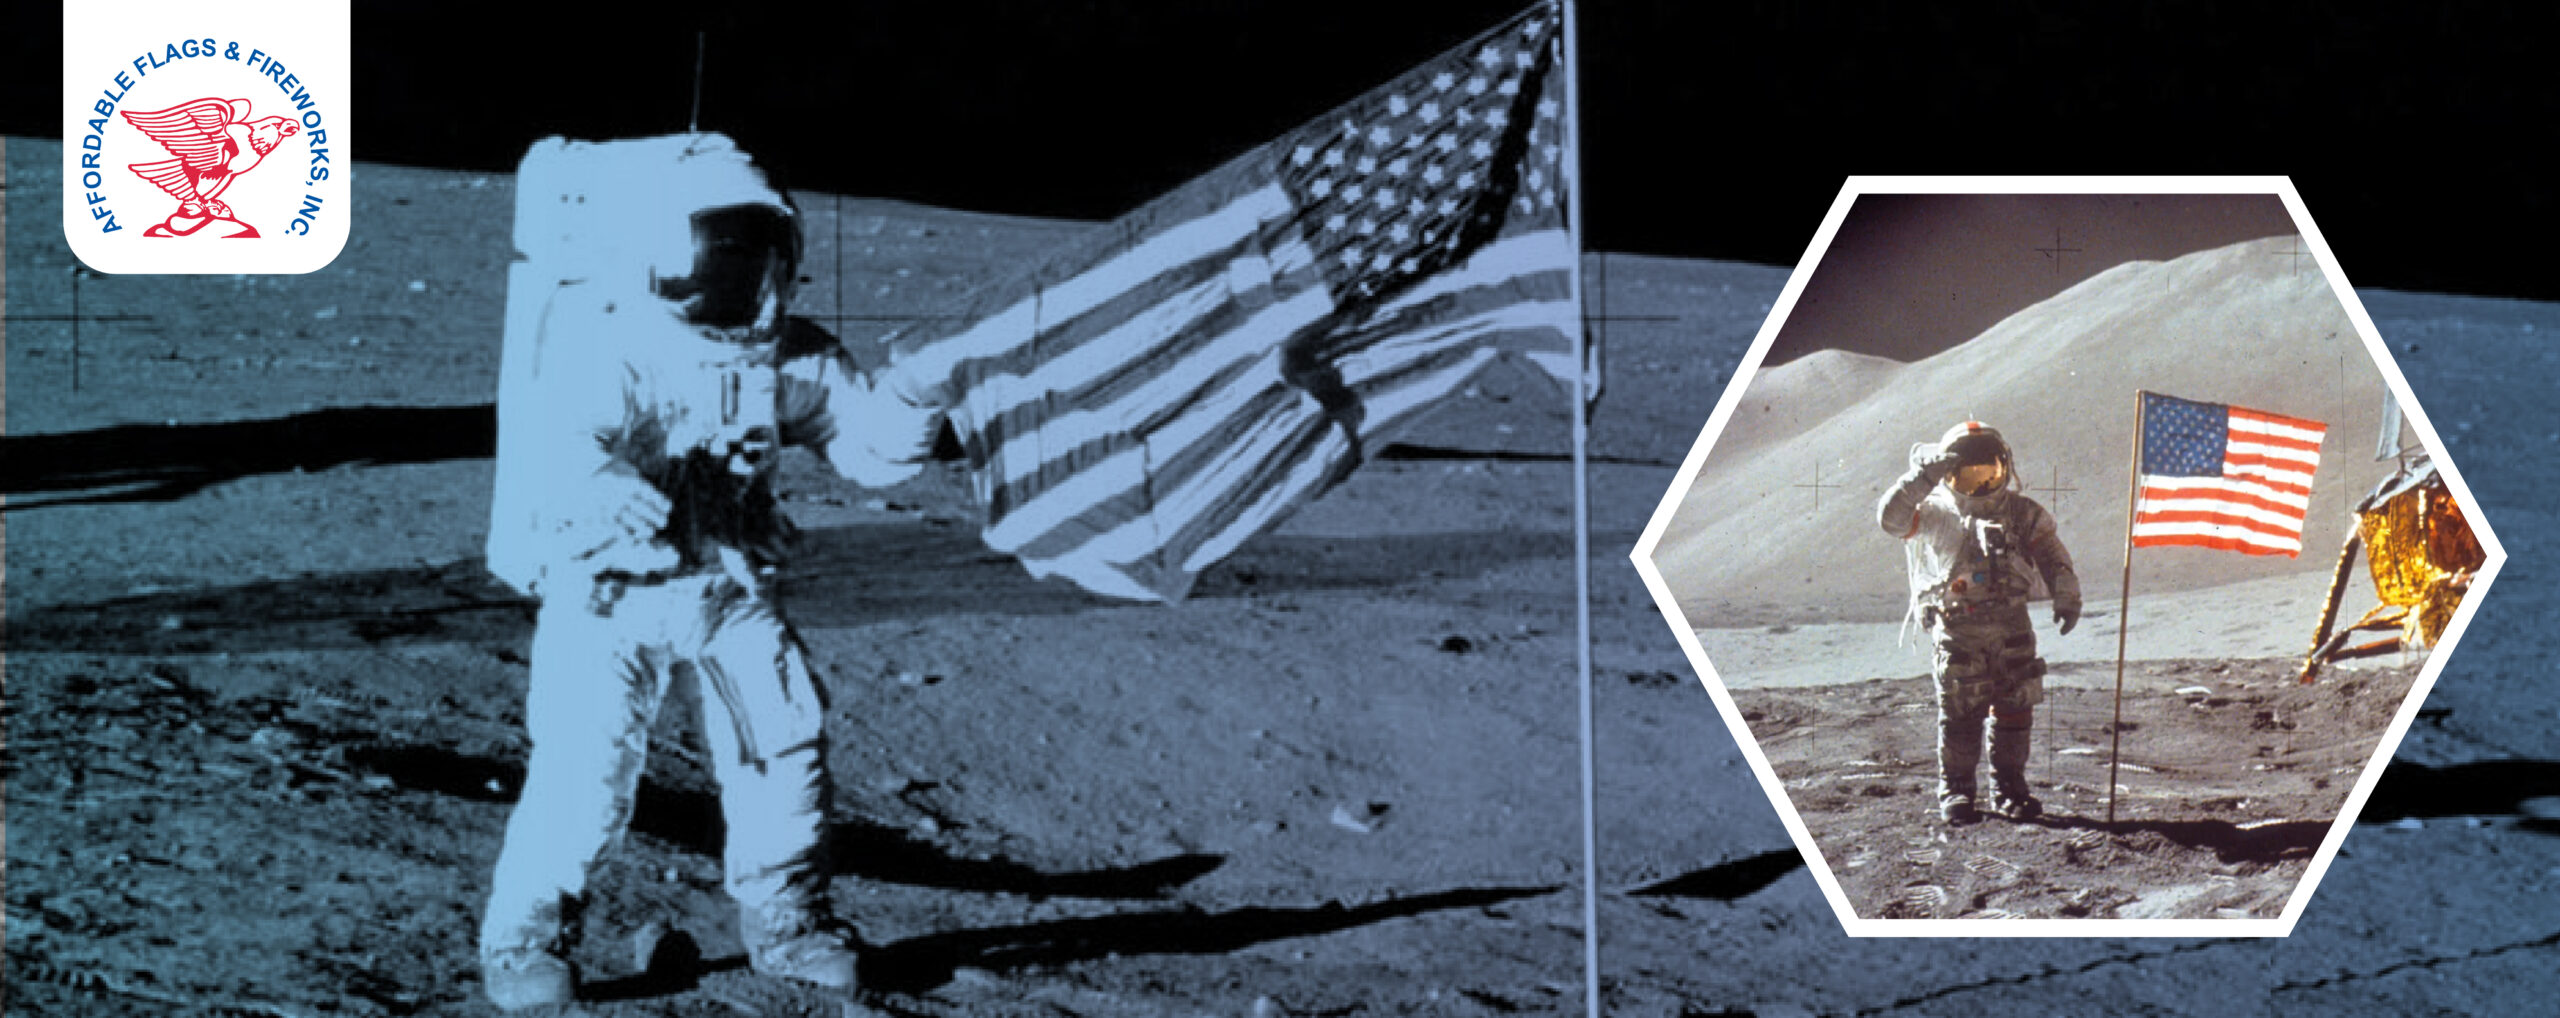 the-historic-moment-of-American-flag-at-the-surface-of-the-moon